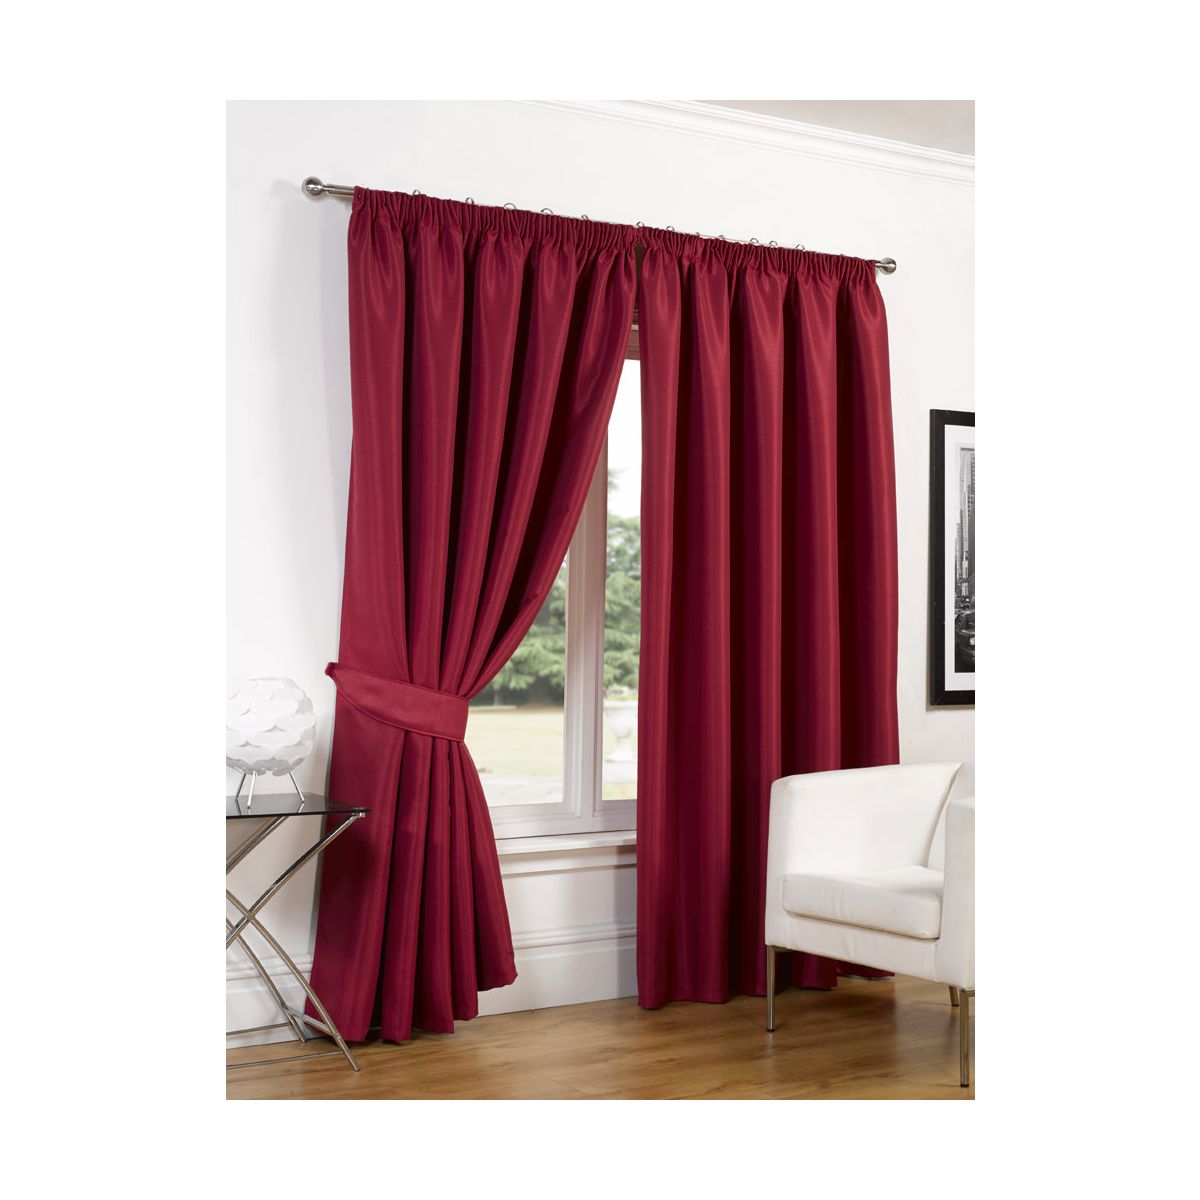 Luxury Faux Silk Blackout Curtains Including Tiebacks - Red 46"X54"